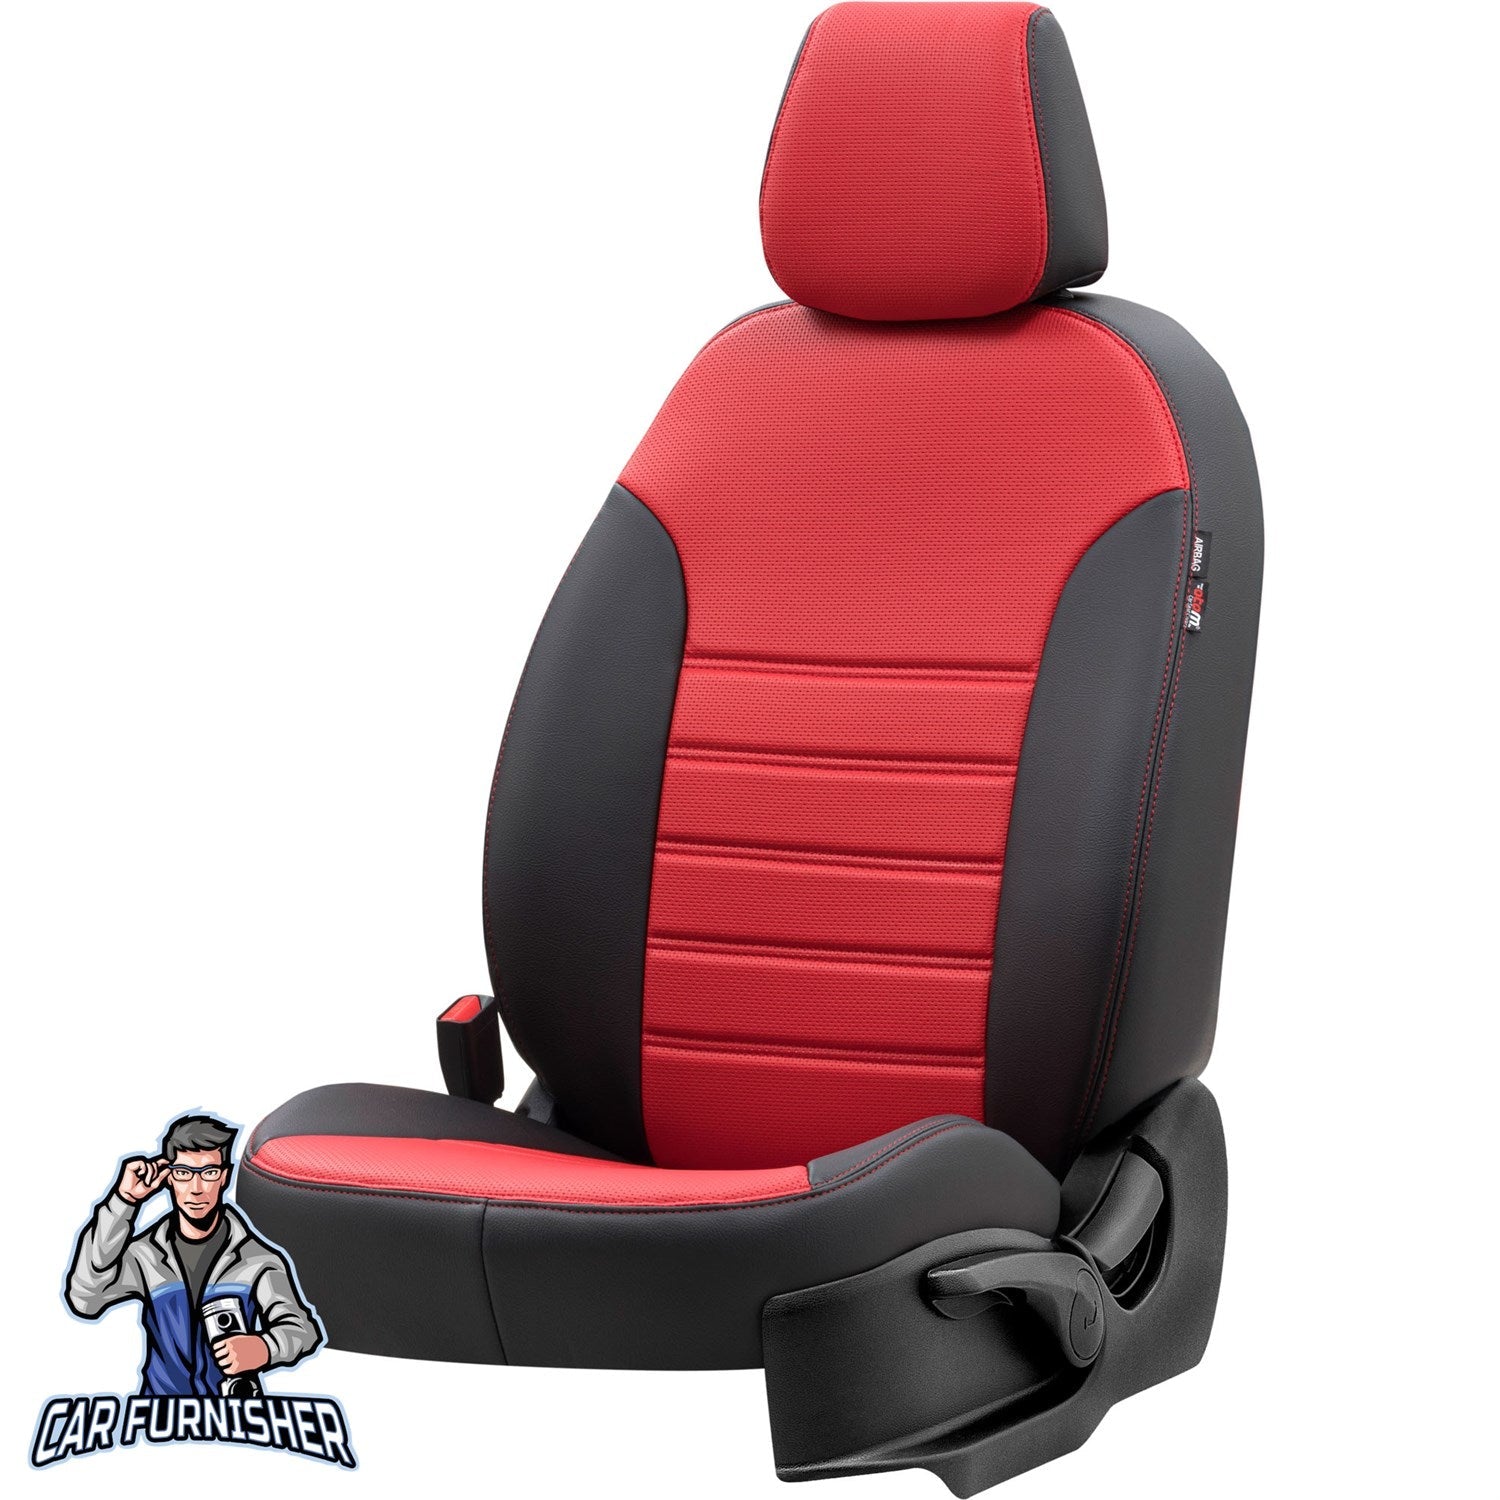 Man TGE Seat Covers New York Leather Design Red Leather